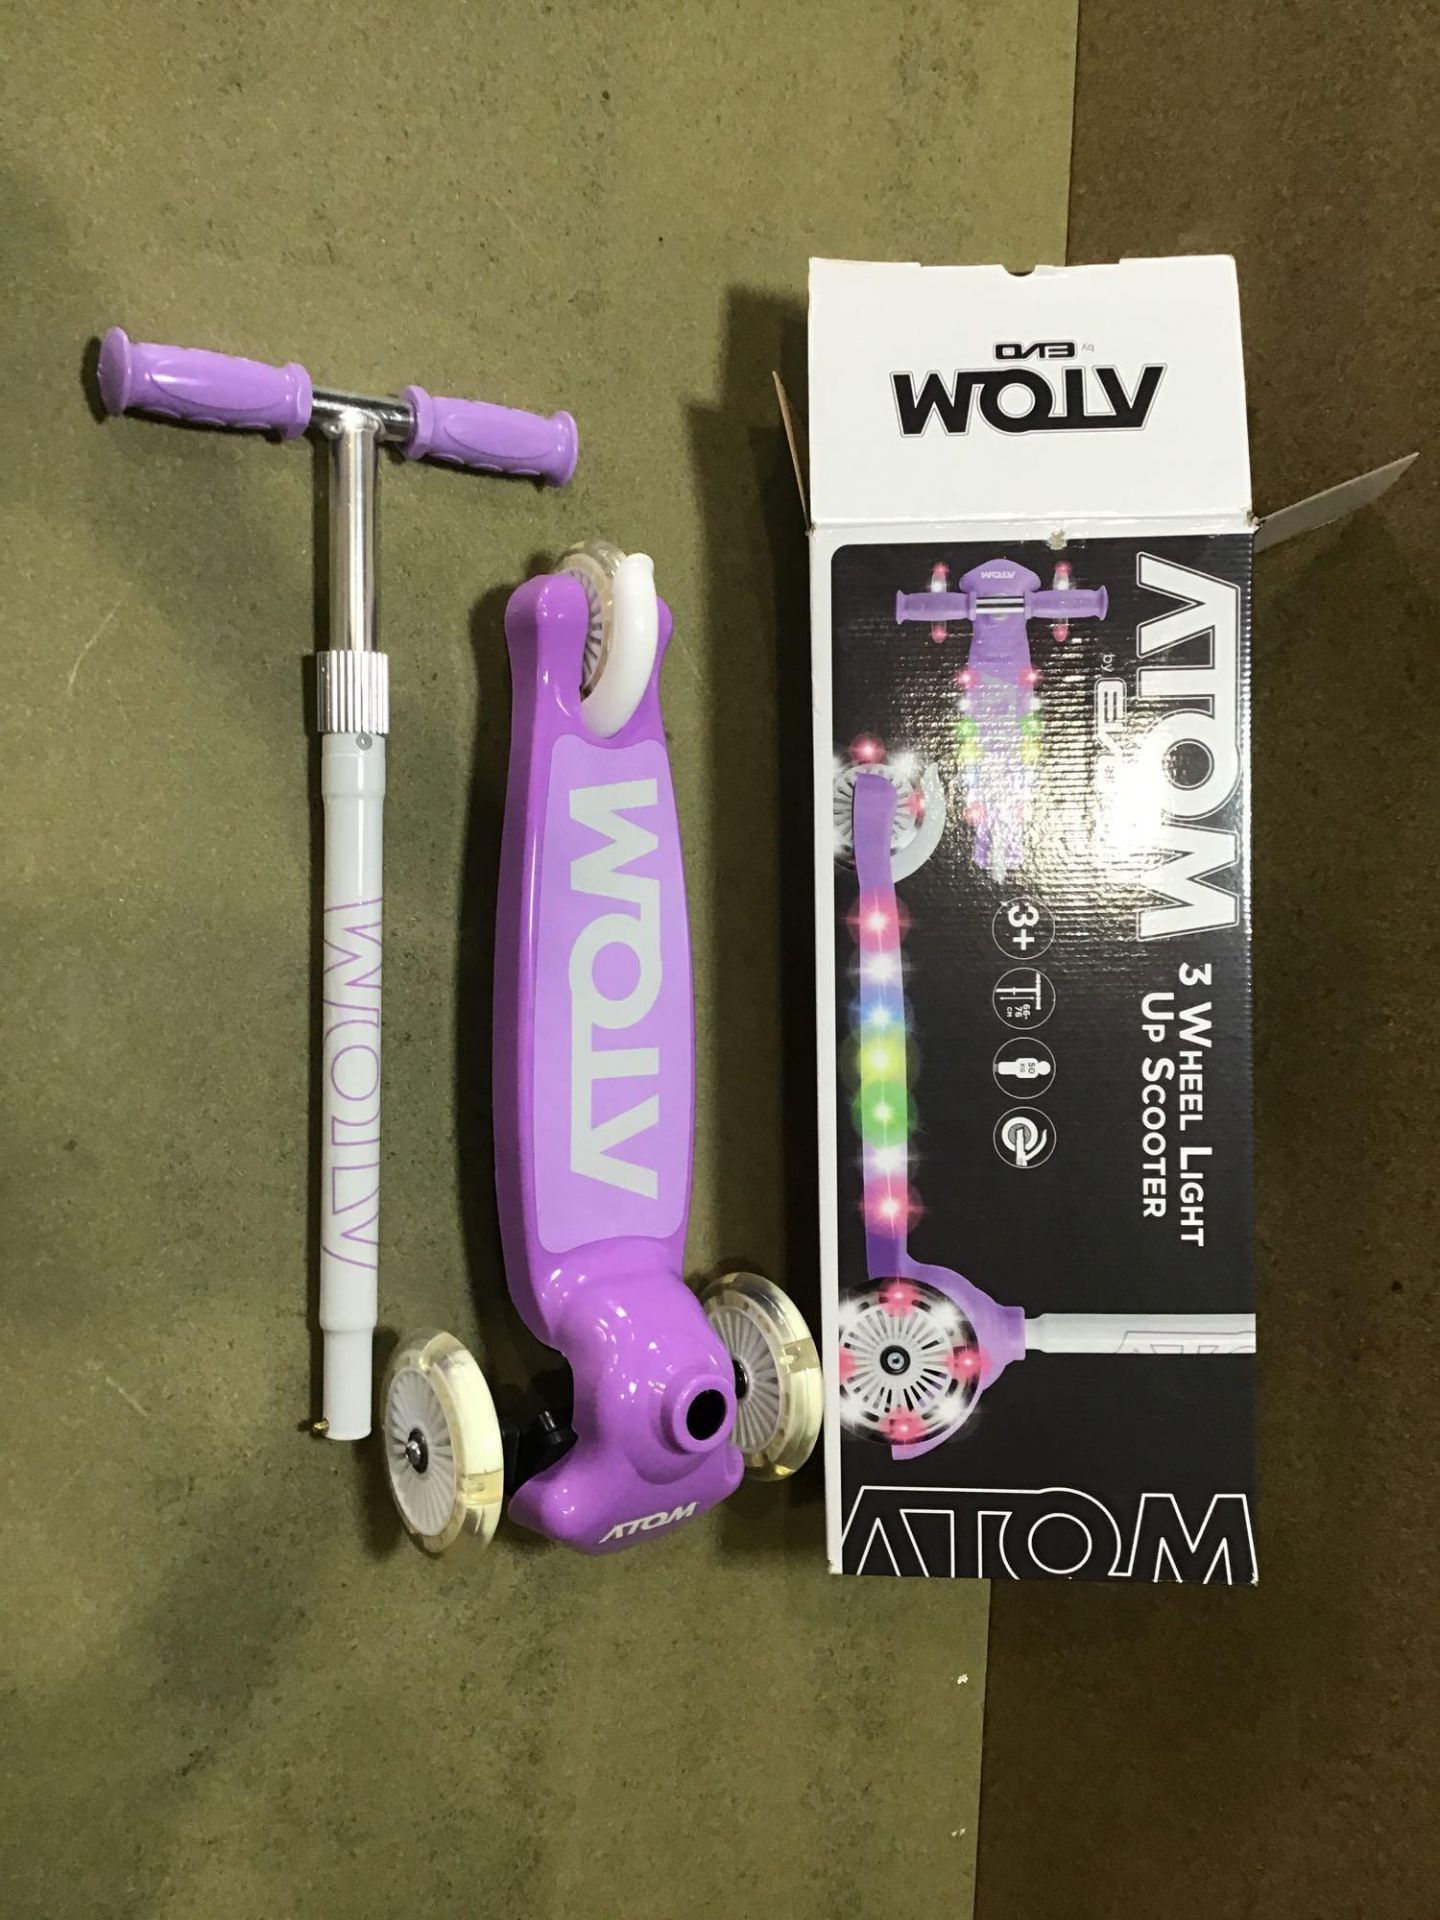 Atom Light Up Tri Scooter, £24.99 RRP - Image 3 of 4